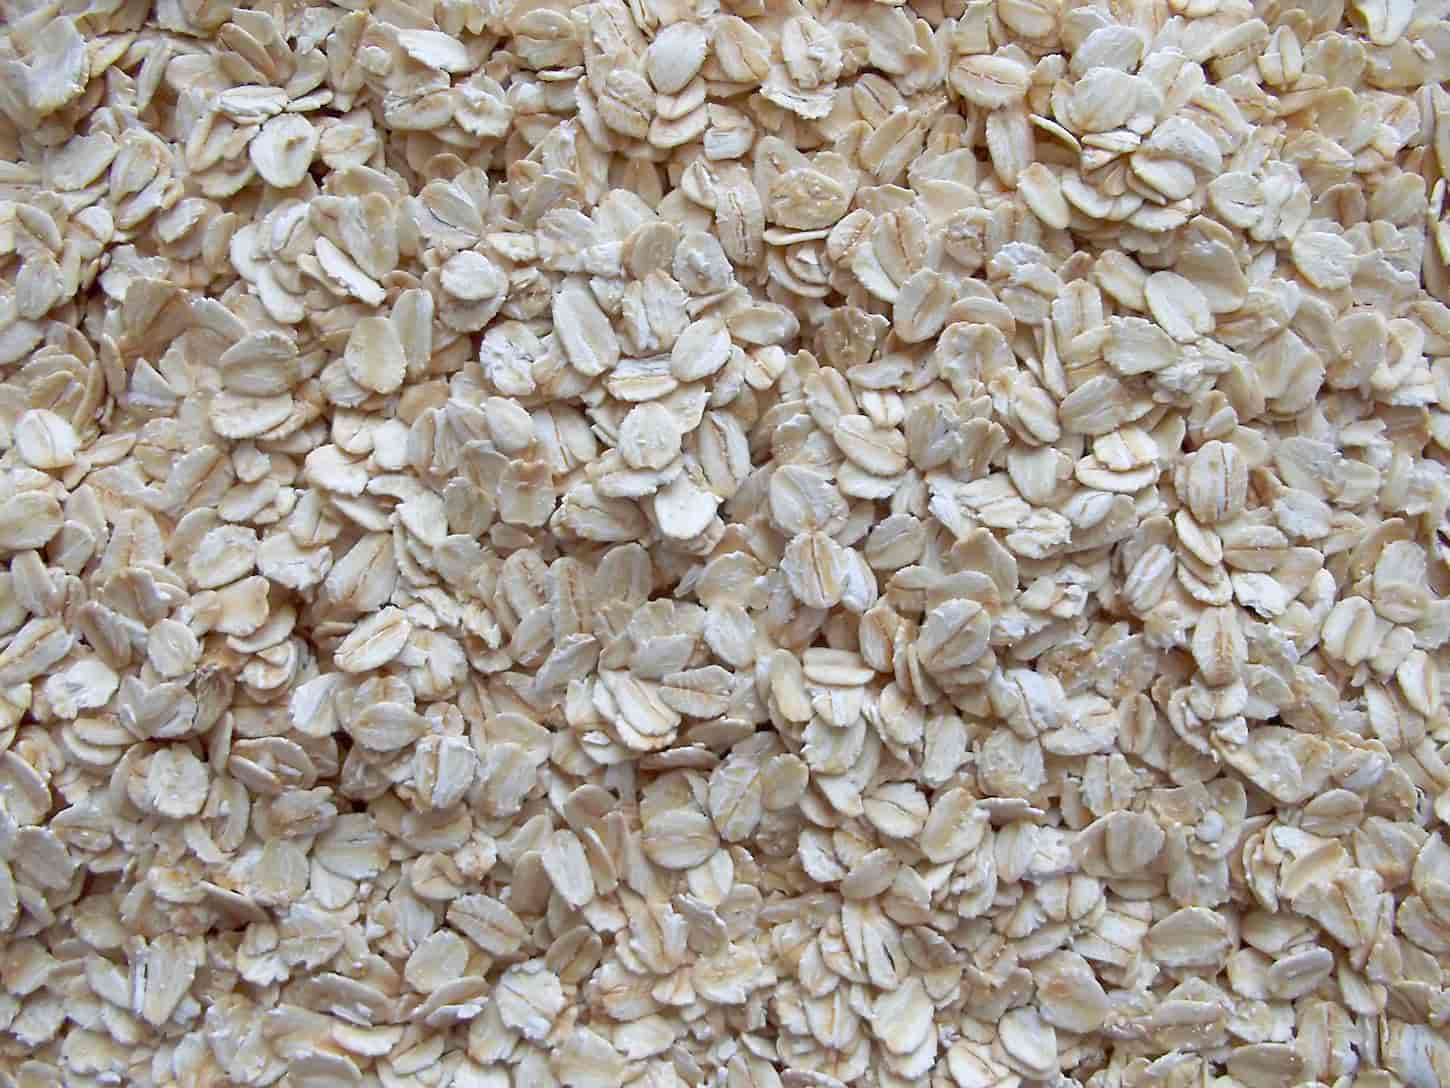 How to Store Oats Long-Term